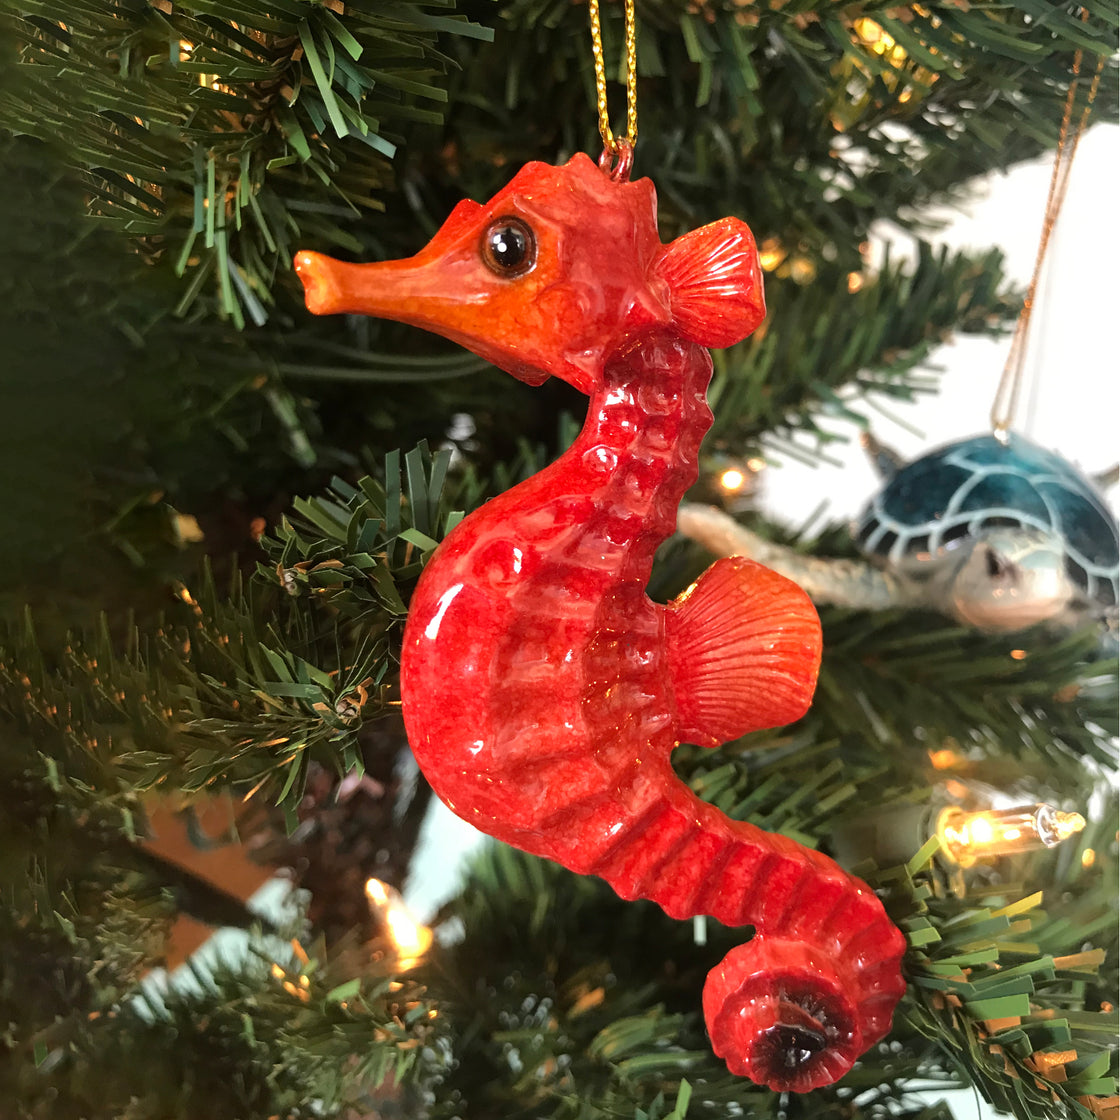 adorable hand-painted red seahorse ornament hanging on Christmas tree with lights by rengöra